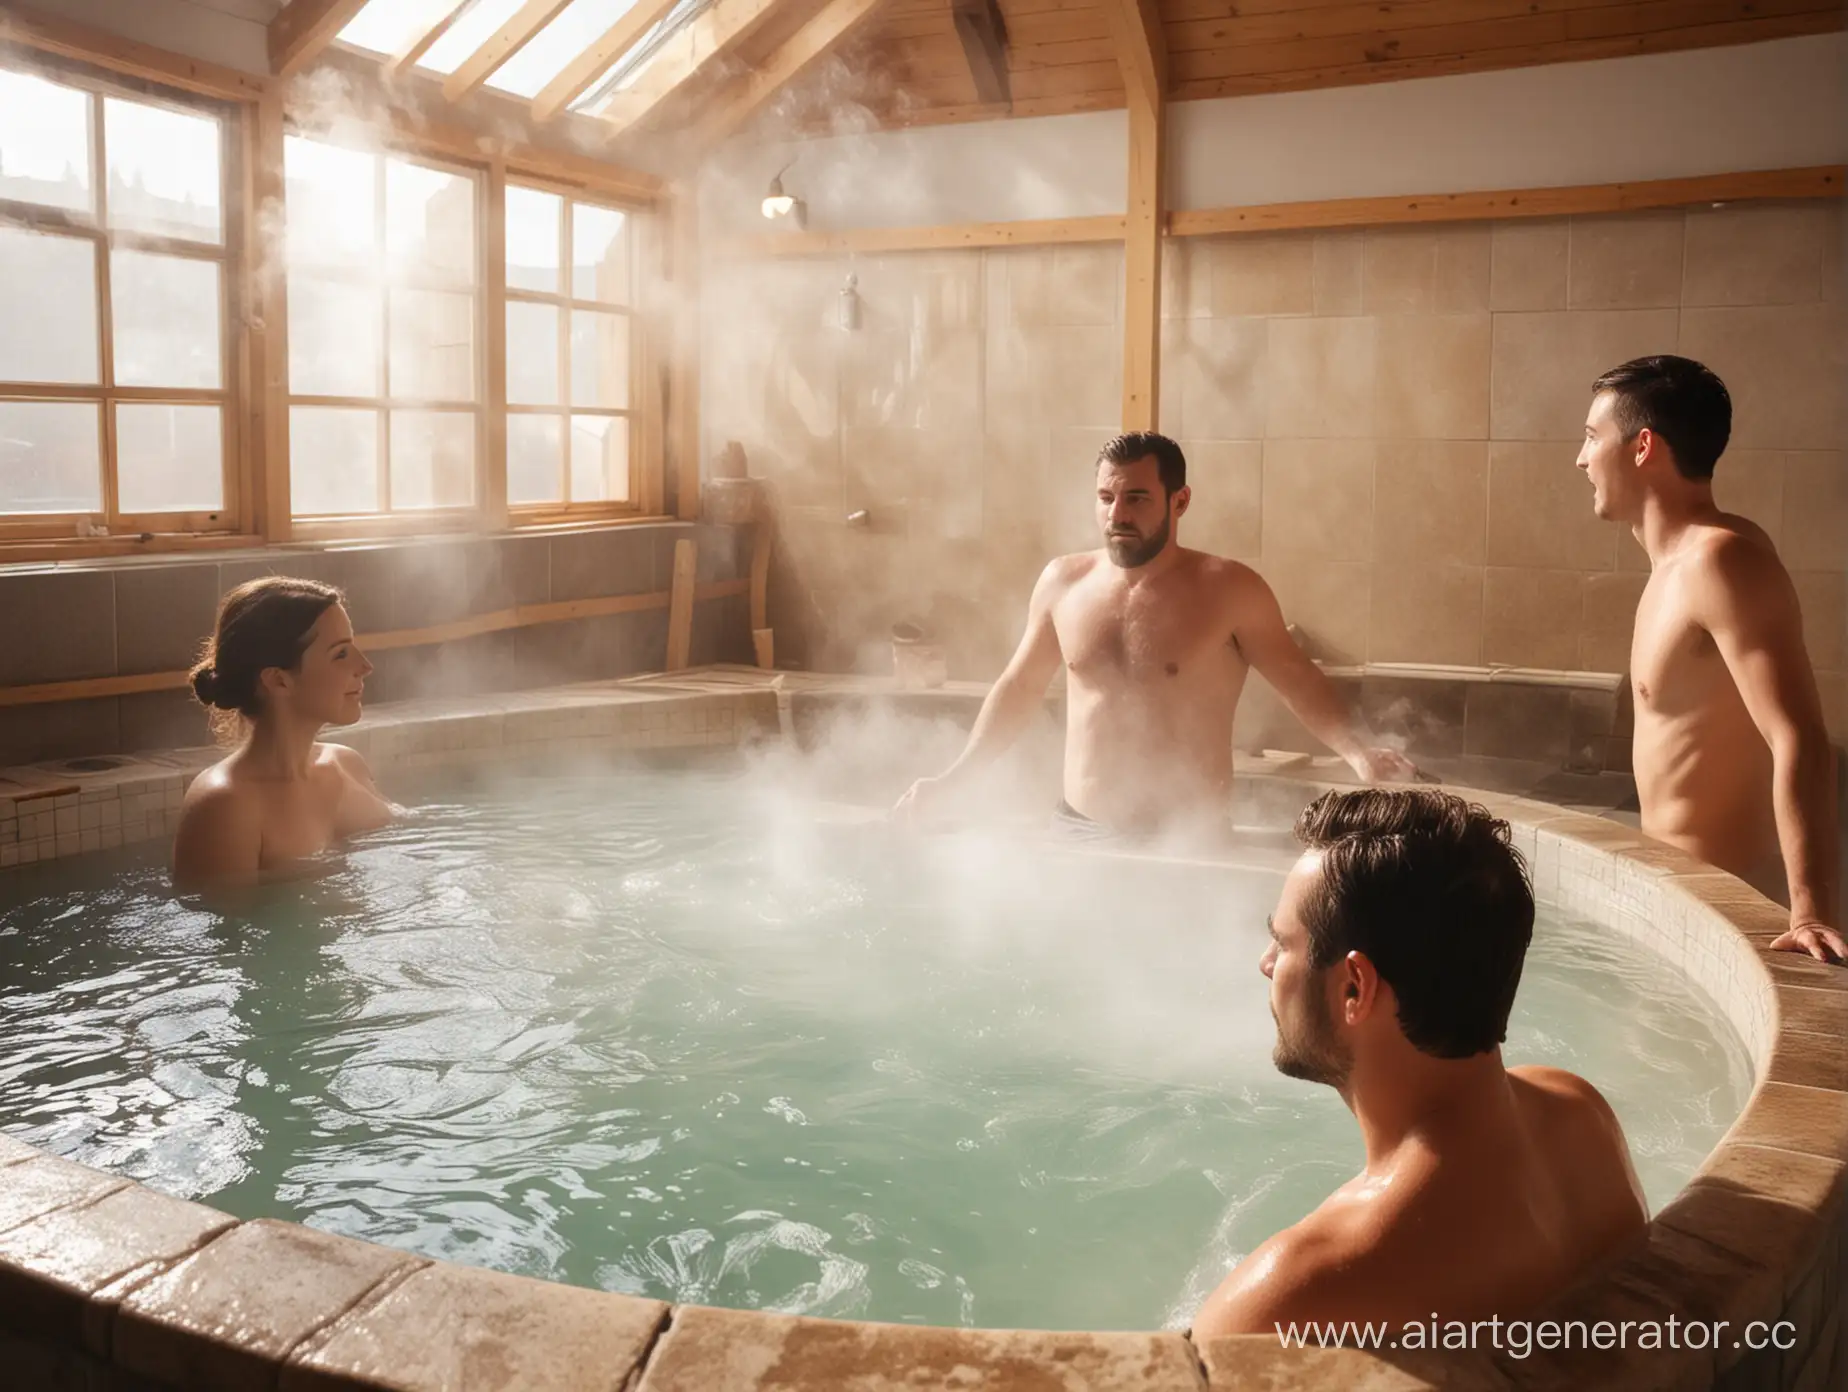 Relaxing-Bathhouse-Scene-with-Steamy-Atmosphere